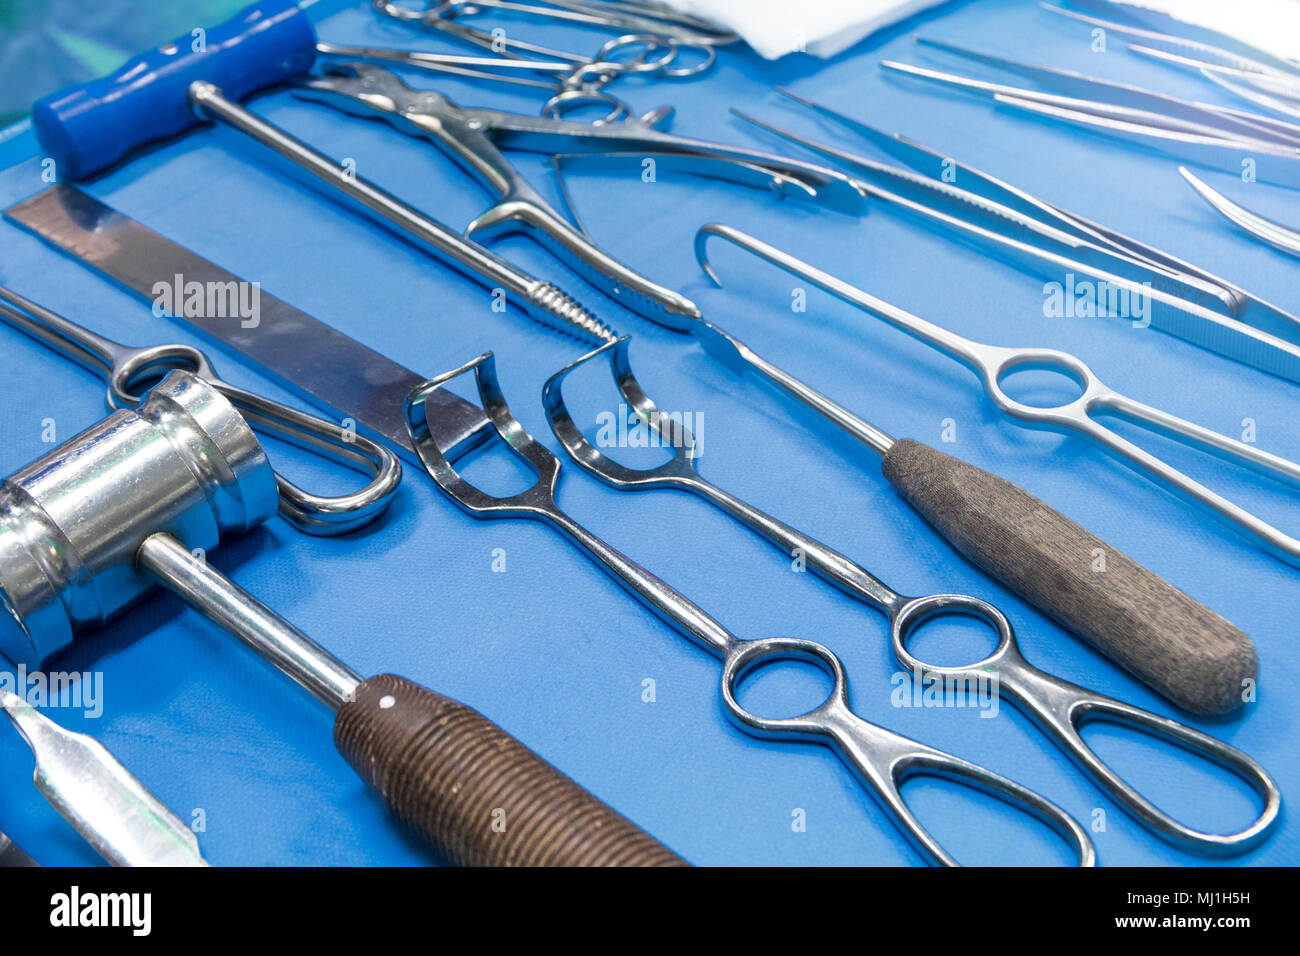 Medical instruments on a table in a hospital emergency room. Stock Photo